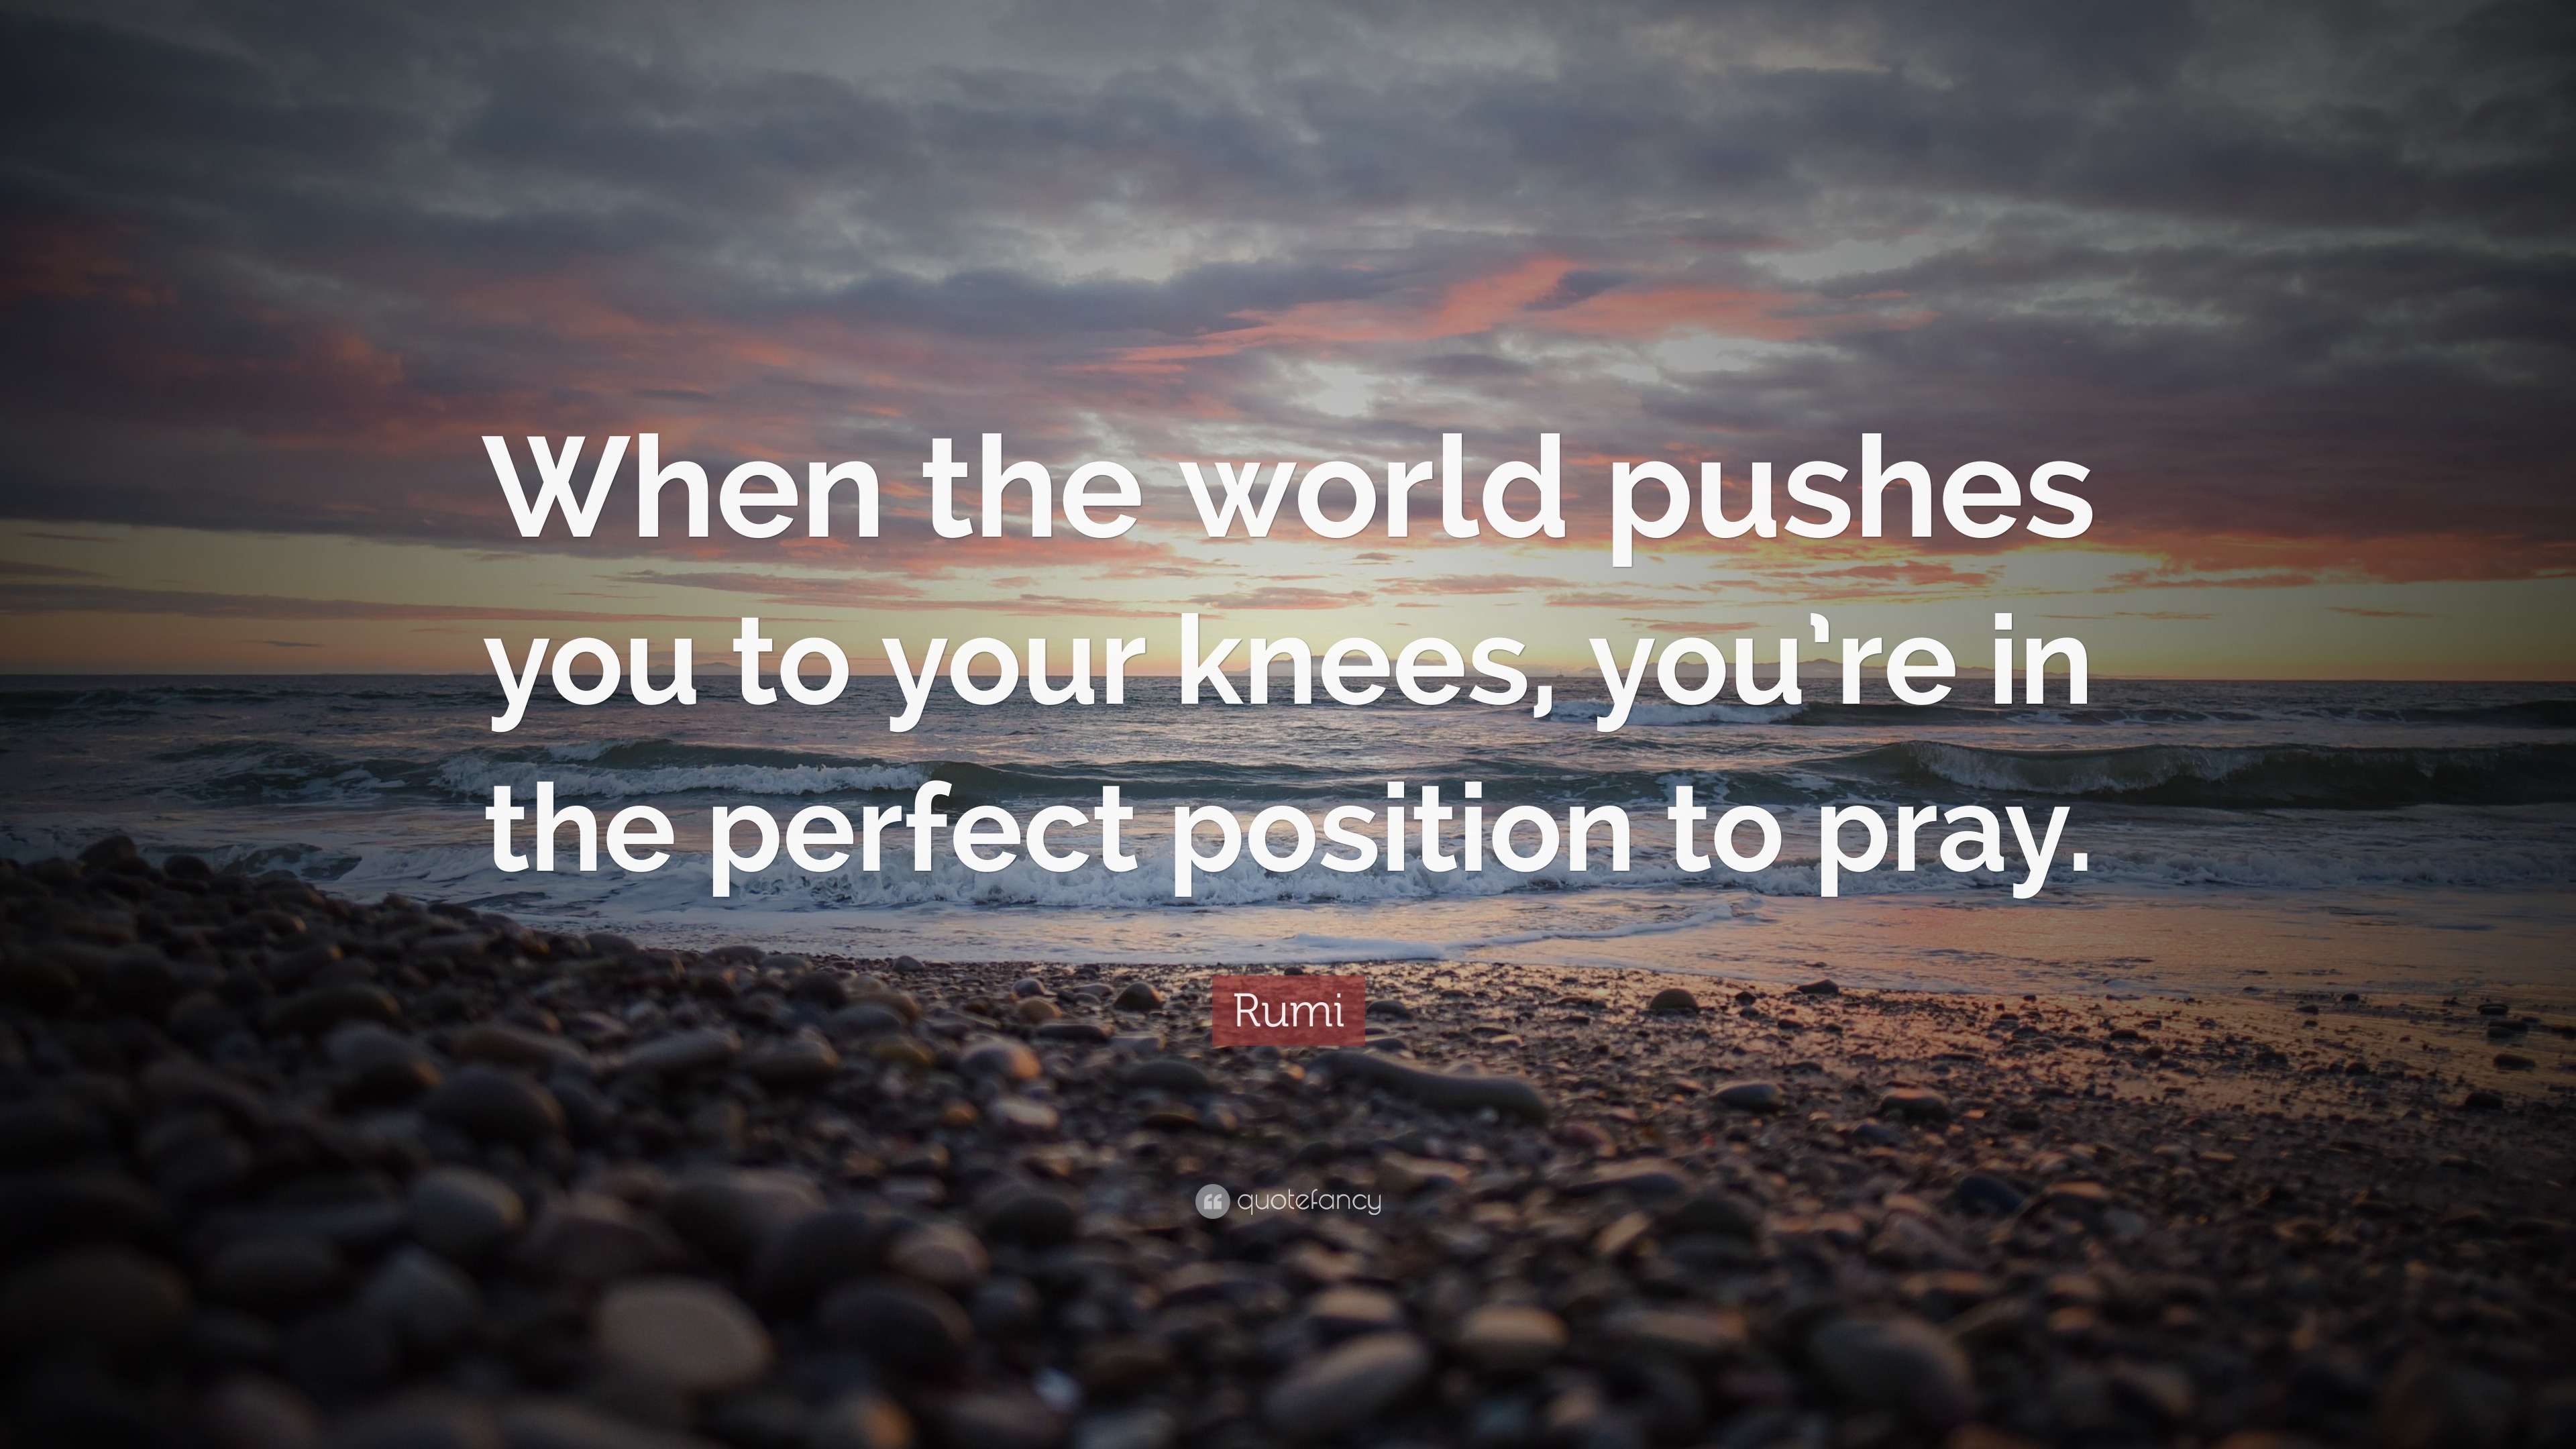 Rumi Quote: “When the world pushes you to your knees, you’re in the